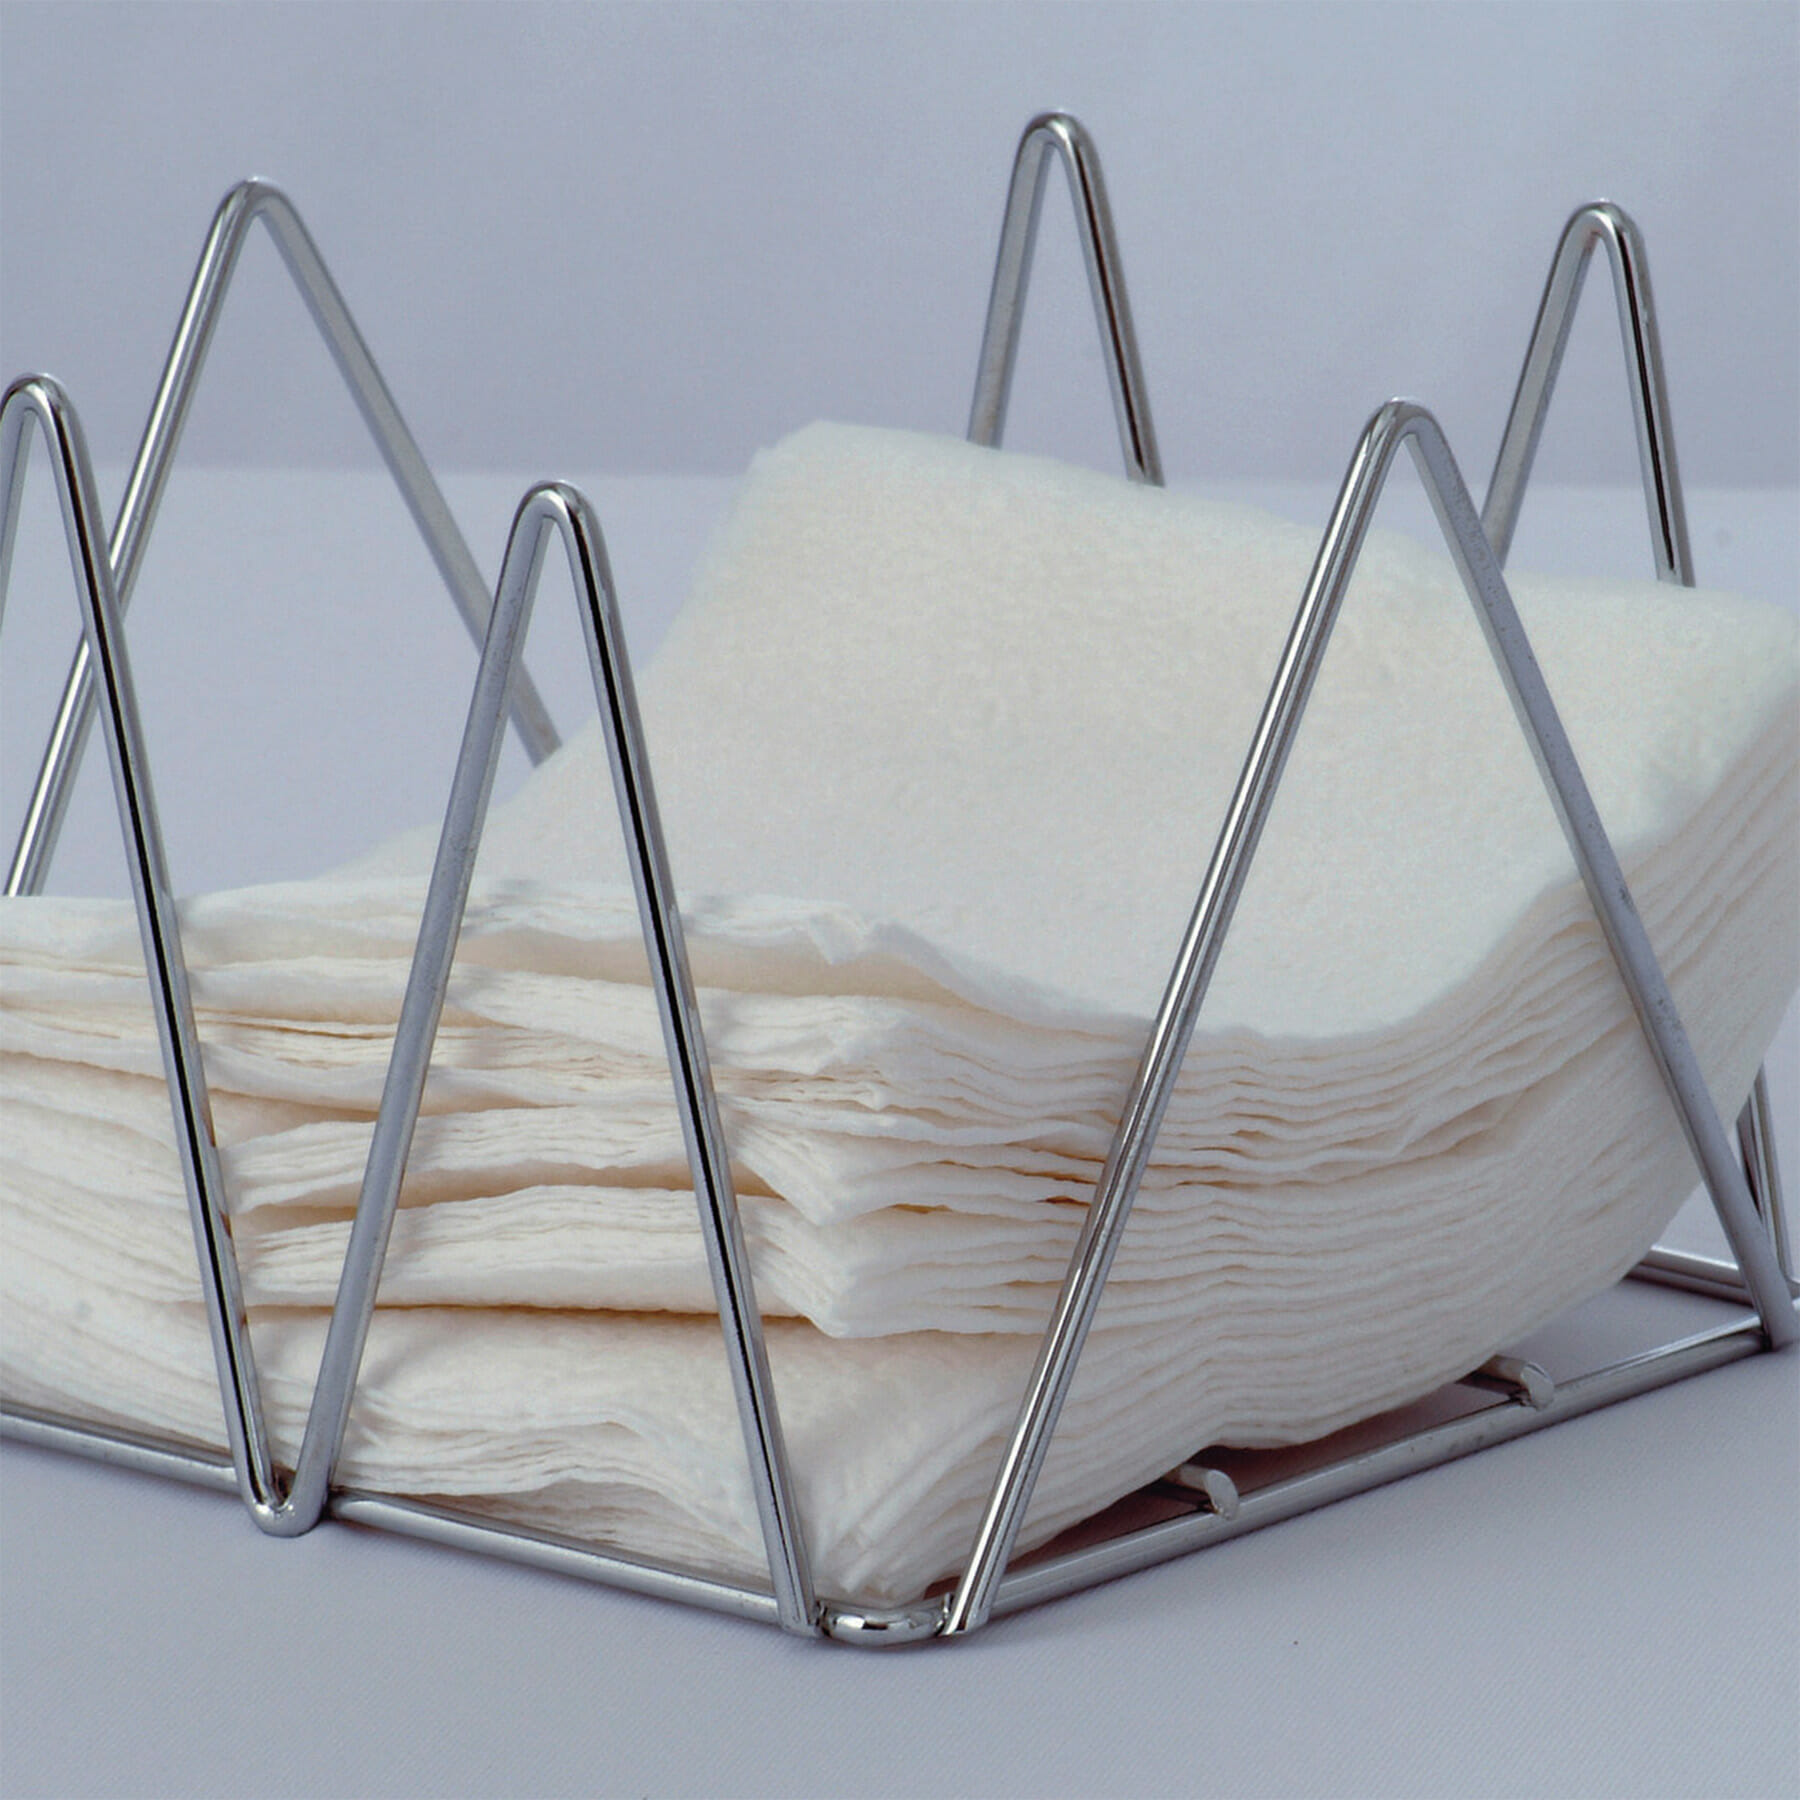 5" Chrome Plated Wire Napkin Holder, 5" tall